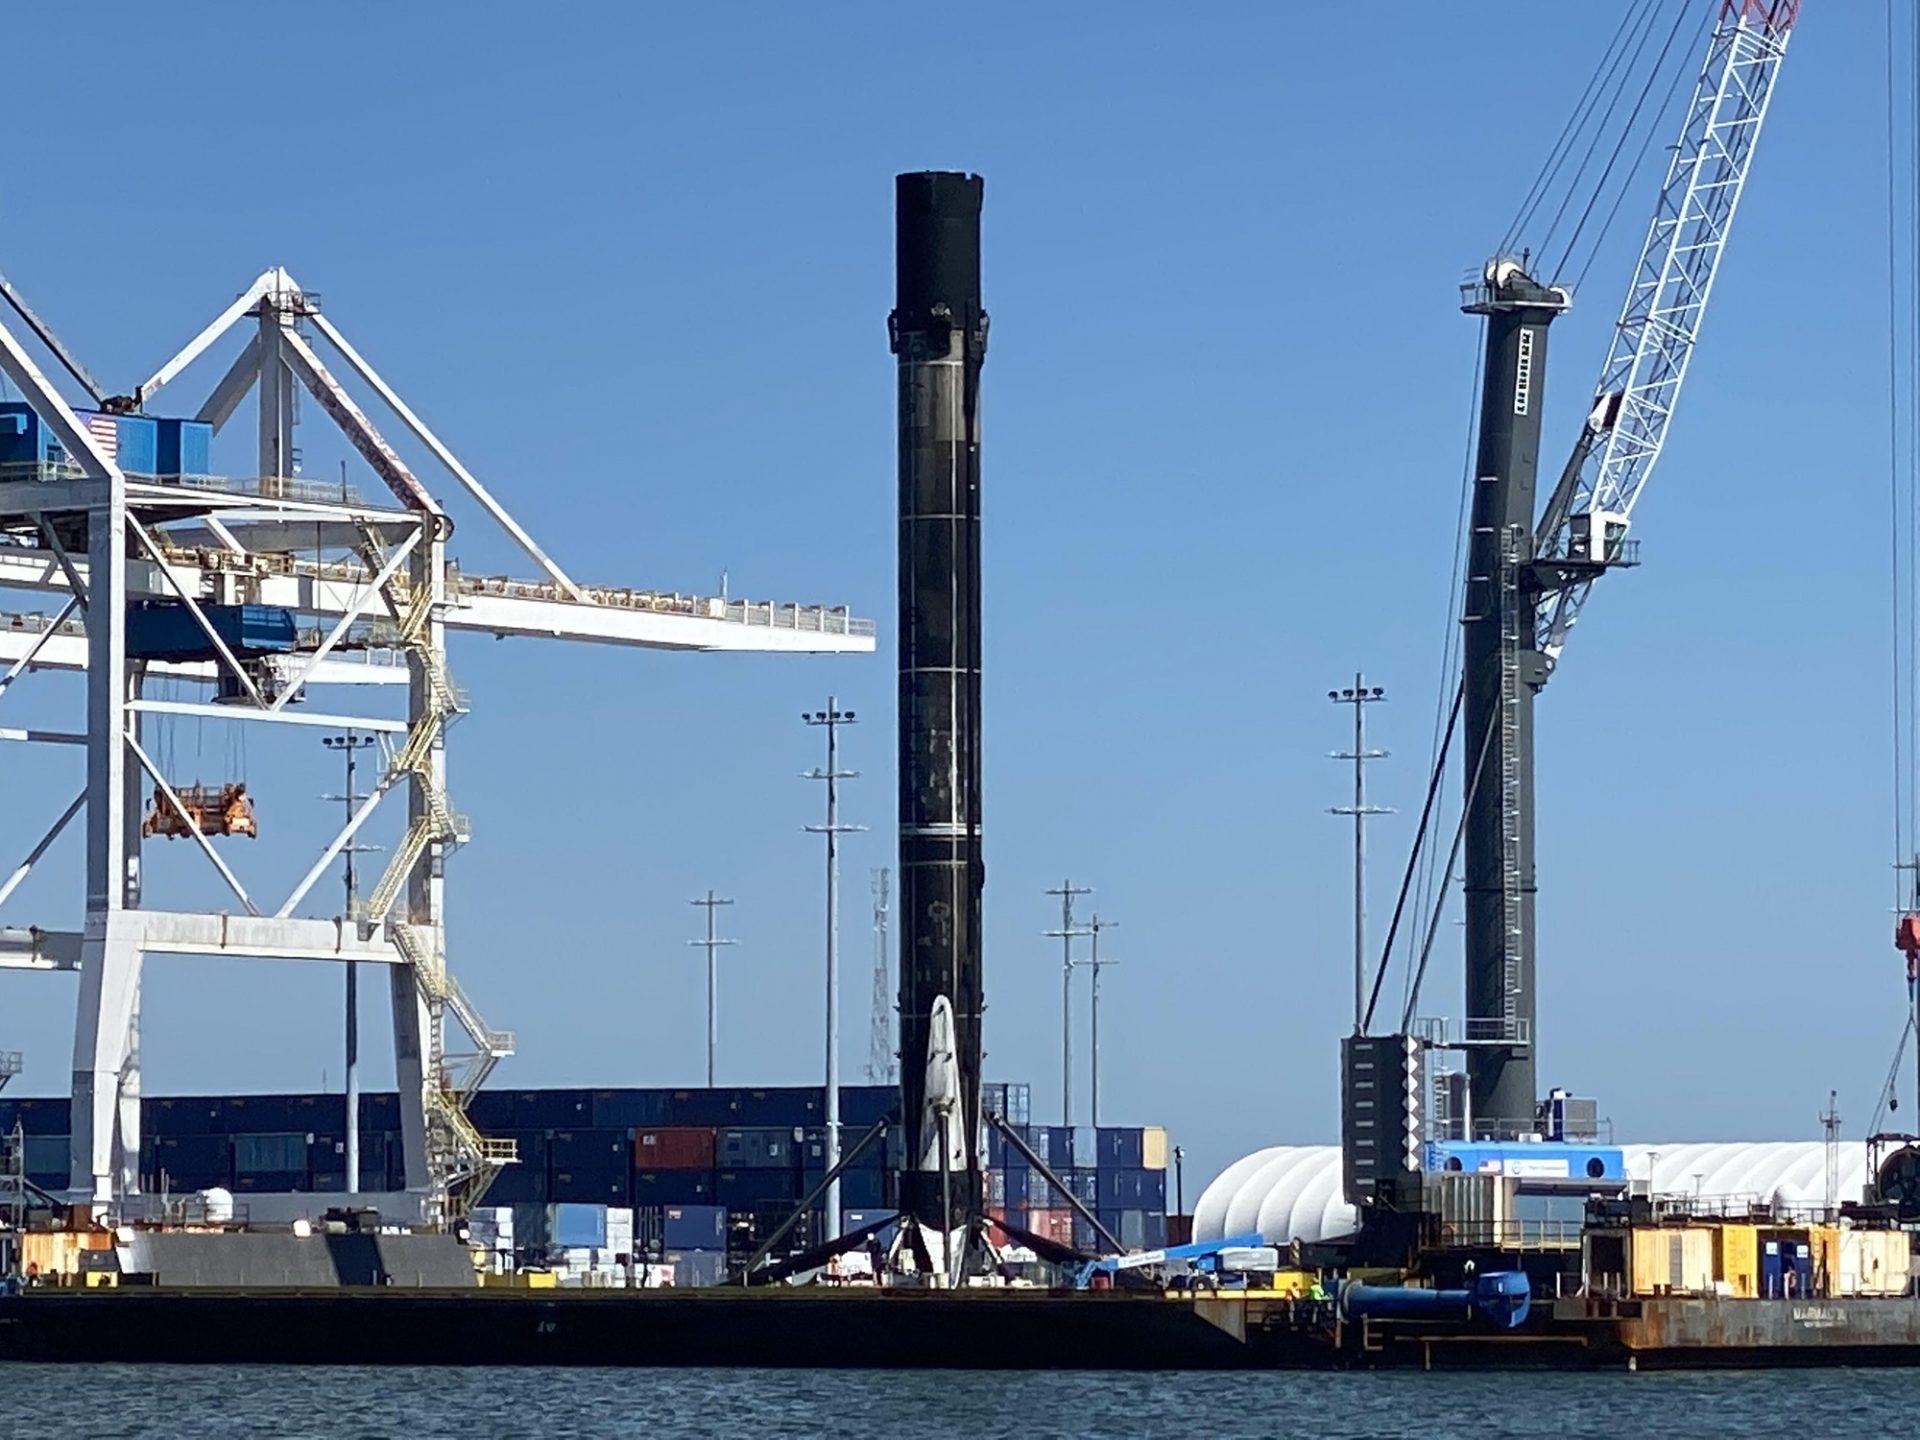 Search for SpaceX’s most-flown rocket returns to dwelling port after ninth flight (photos)